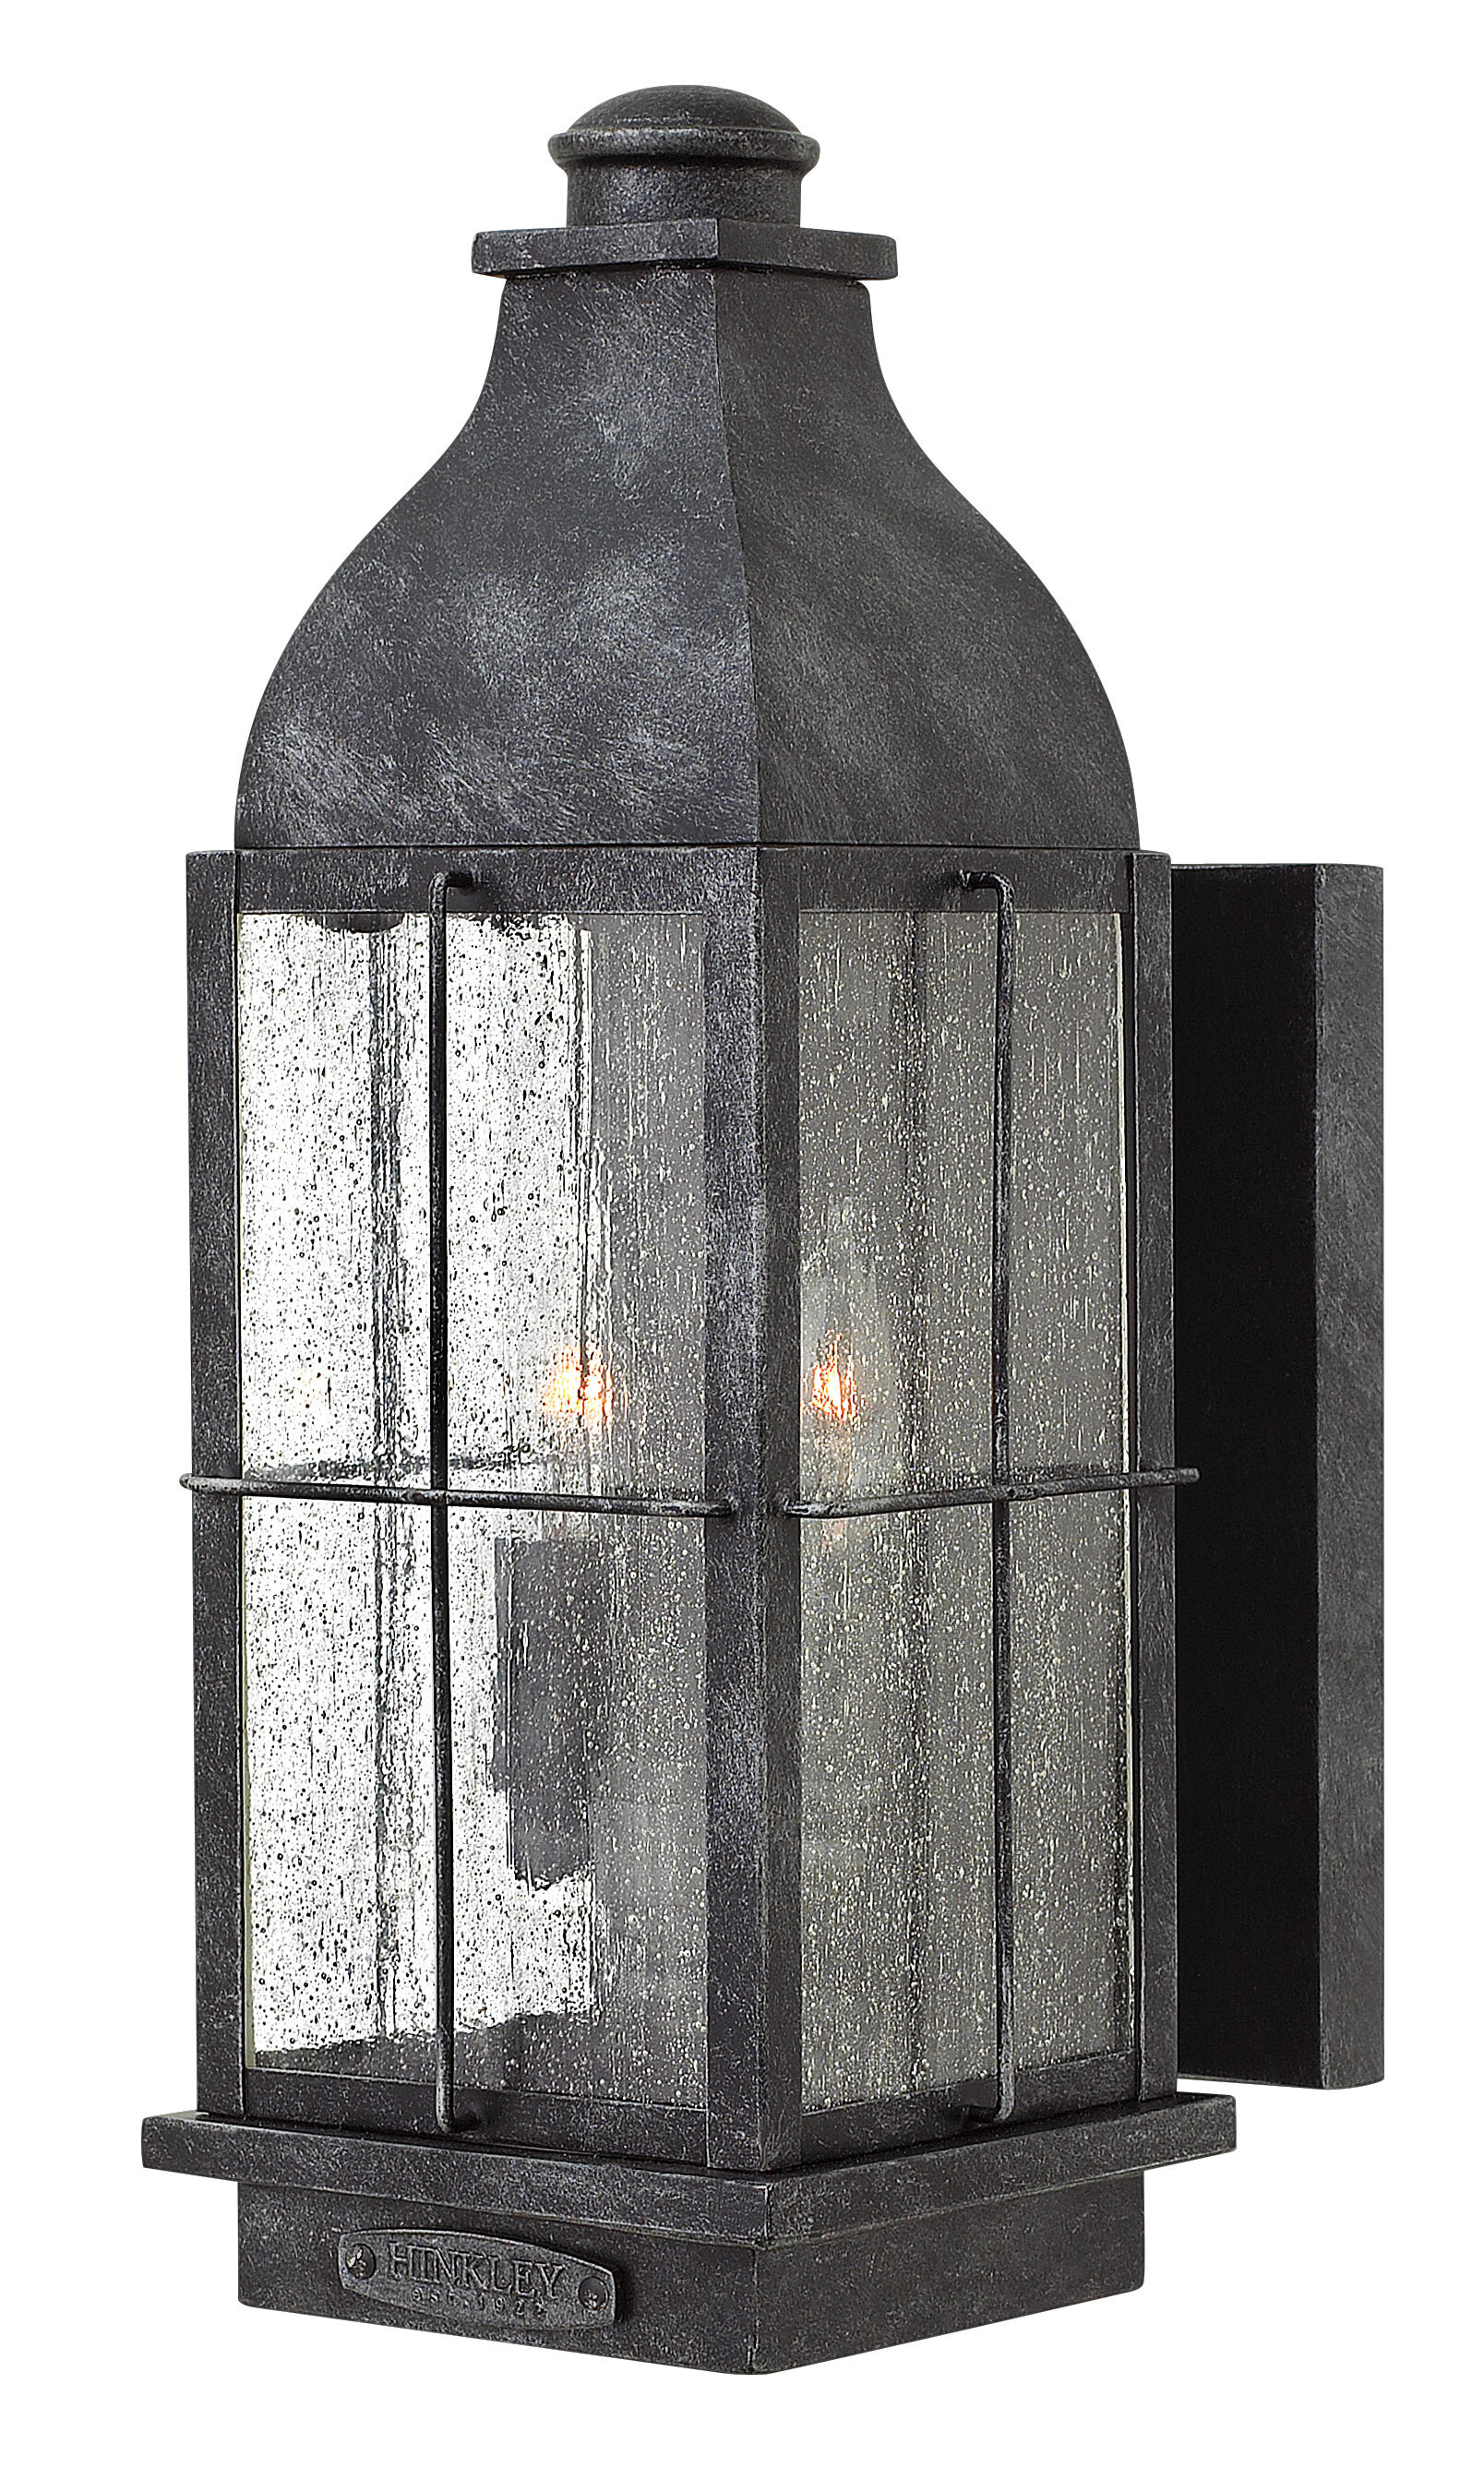 18" Chimney Lantern in Blackened TinDecorative Rustic Accent Lamp